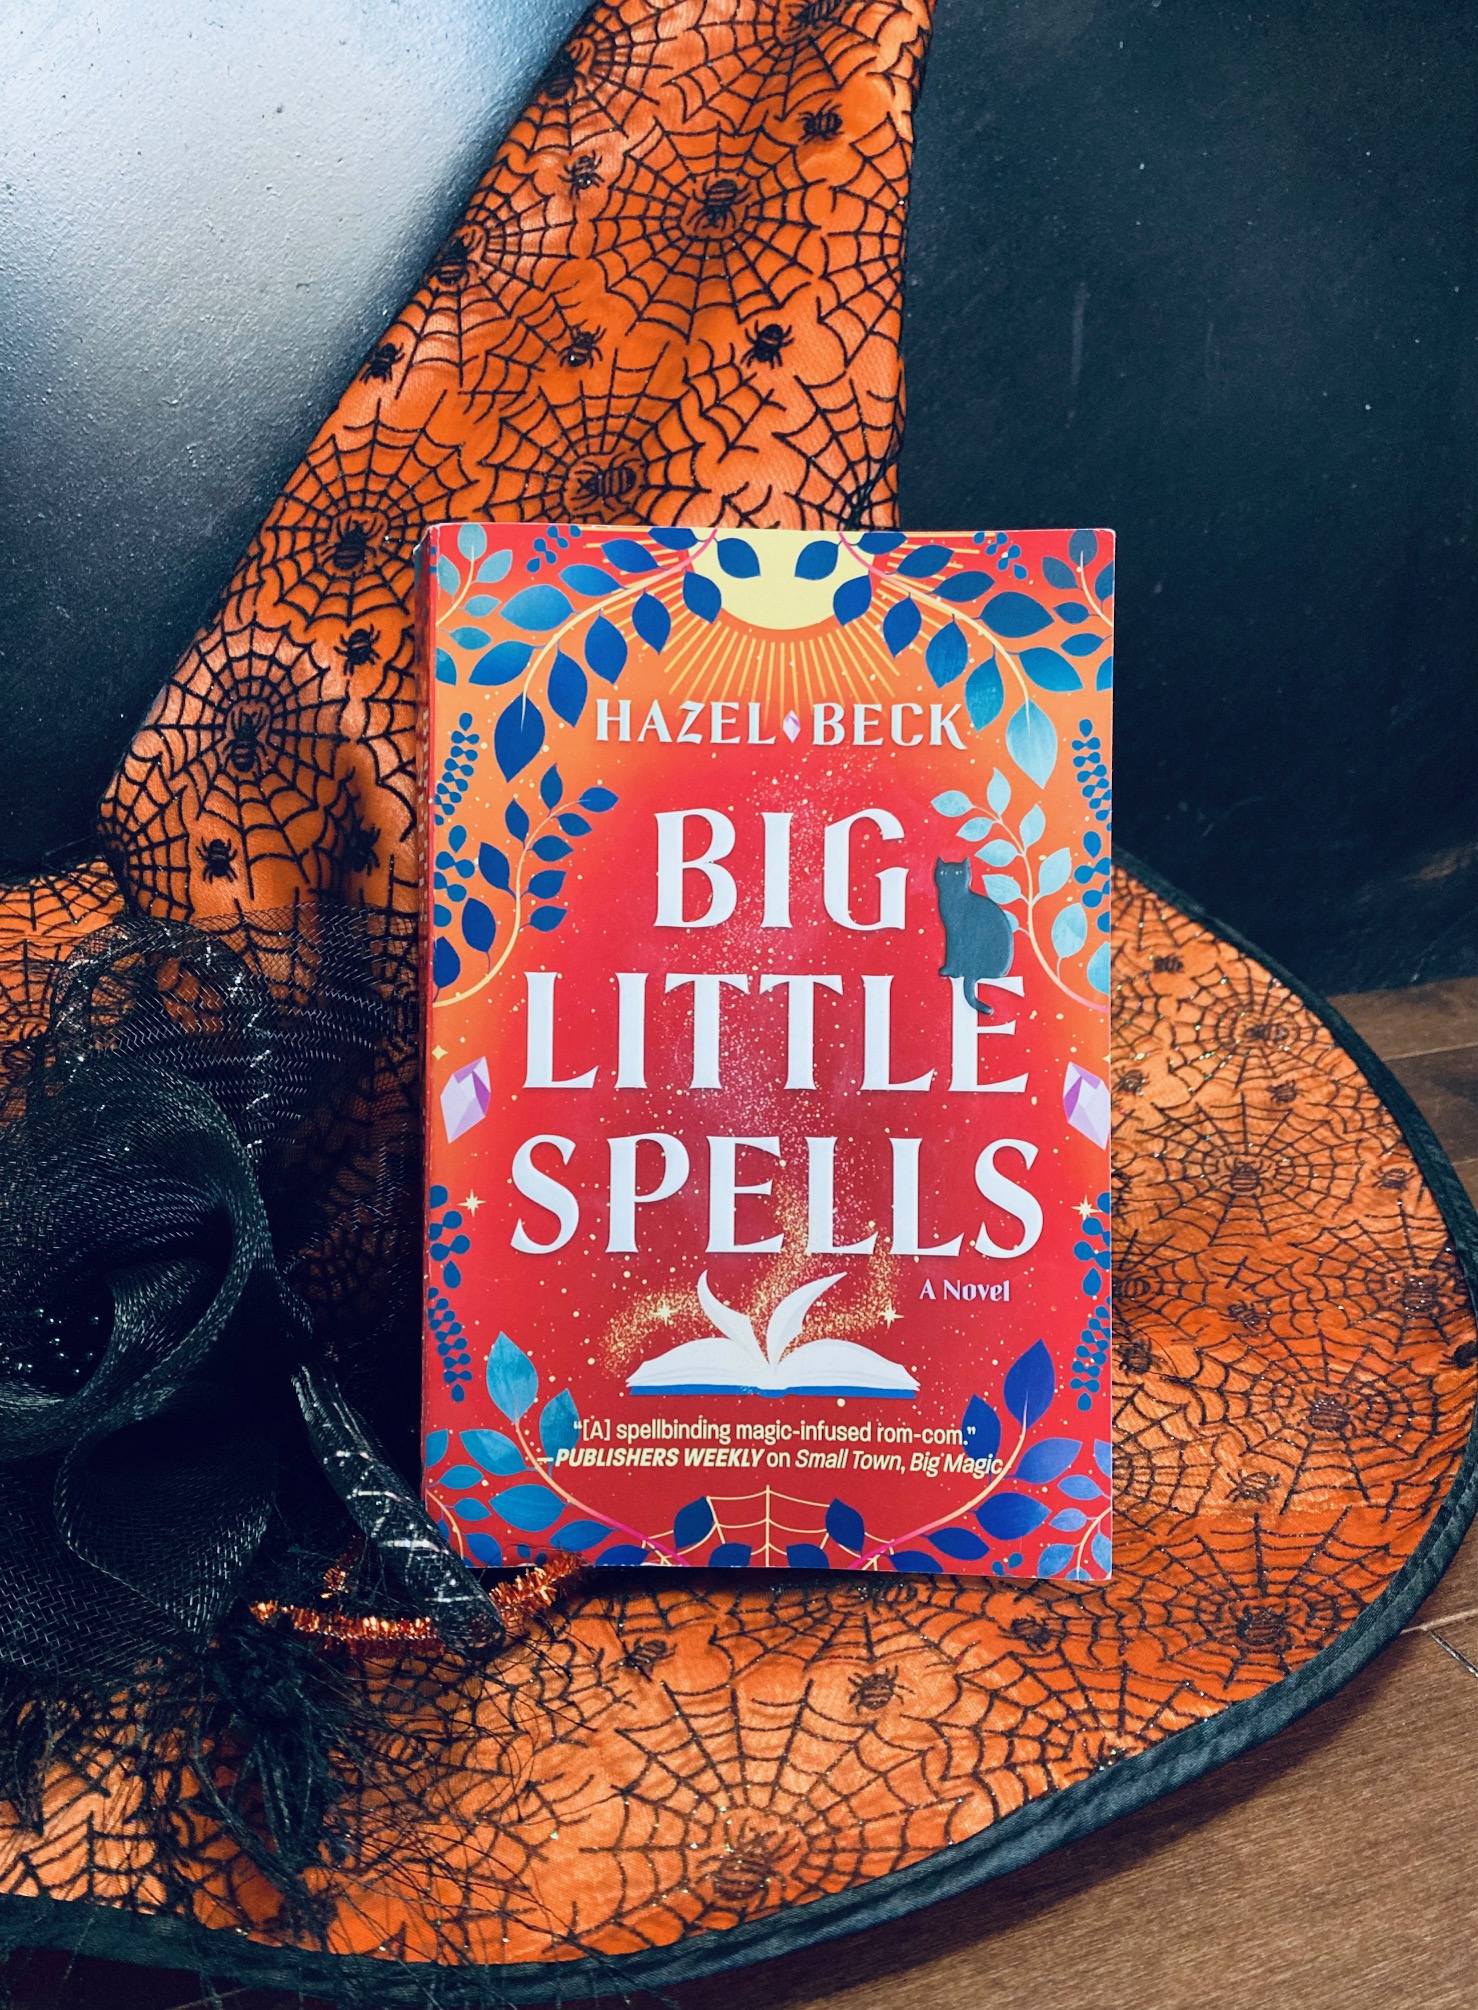 Big Little Spells by Hazel Beck book pictured on a witch hat